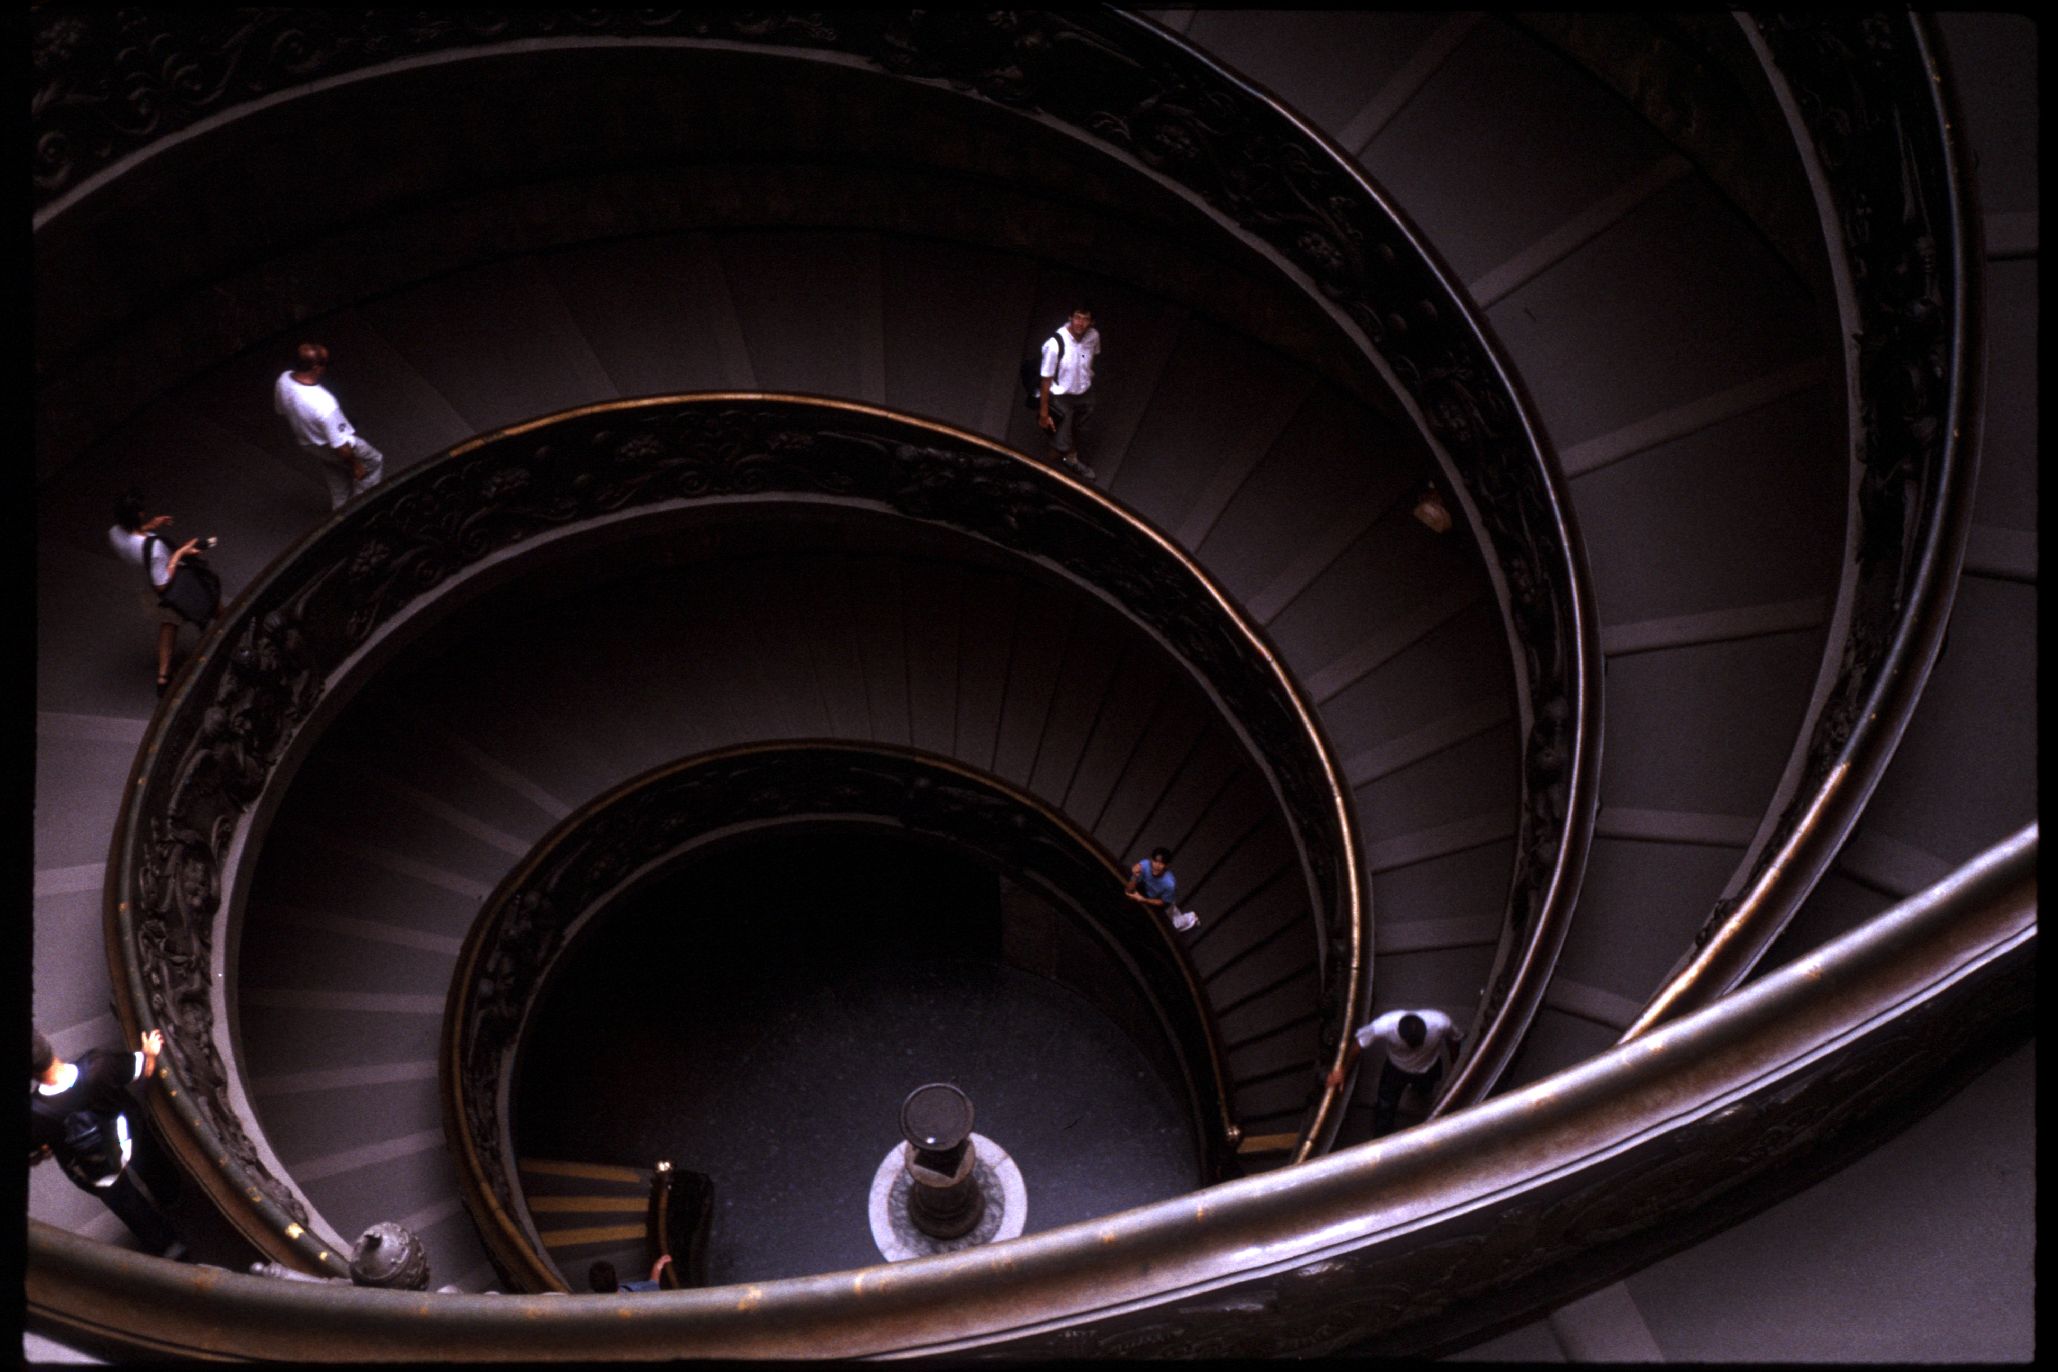 spiralstairs spiral stairs architecture interiors roma people walking descending staircase